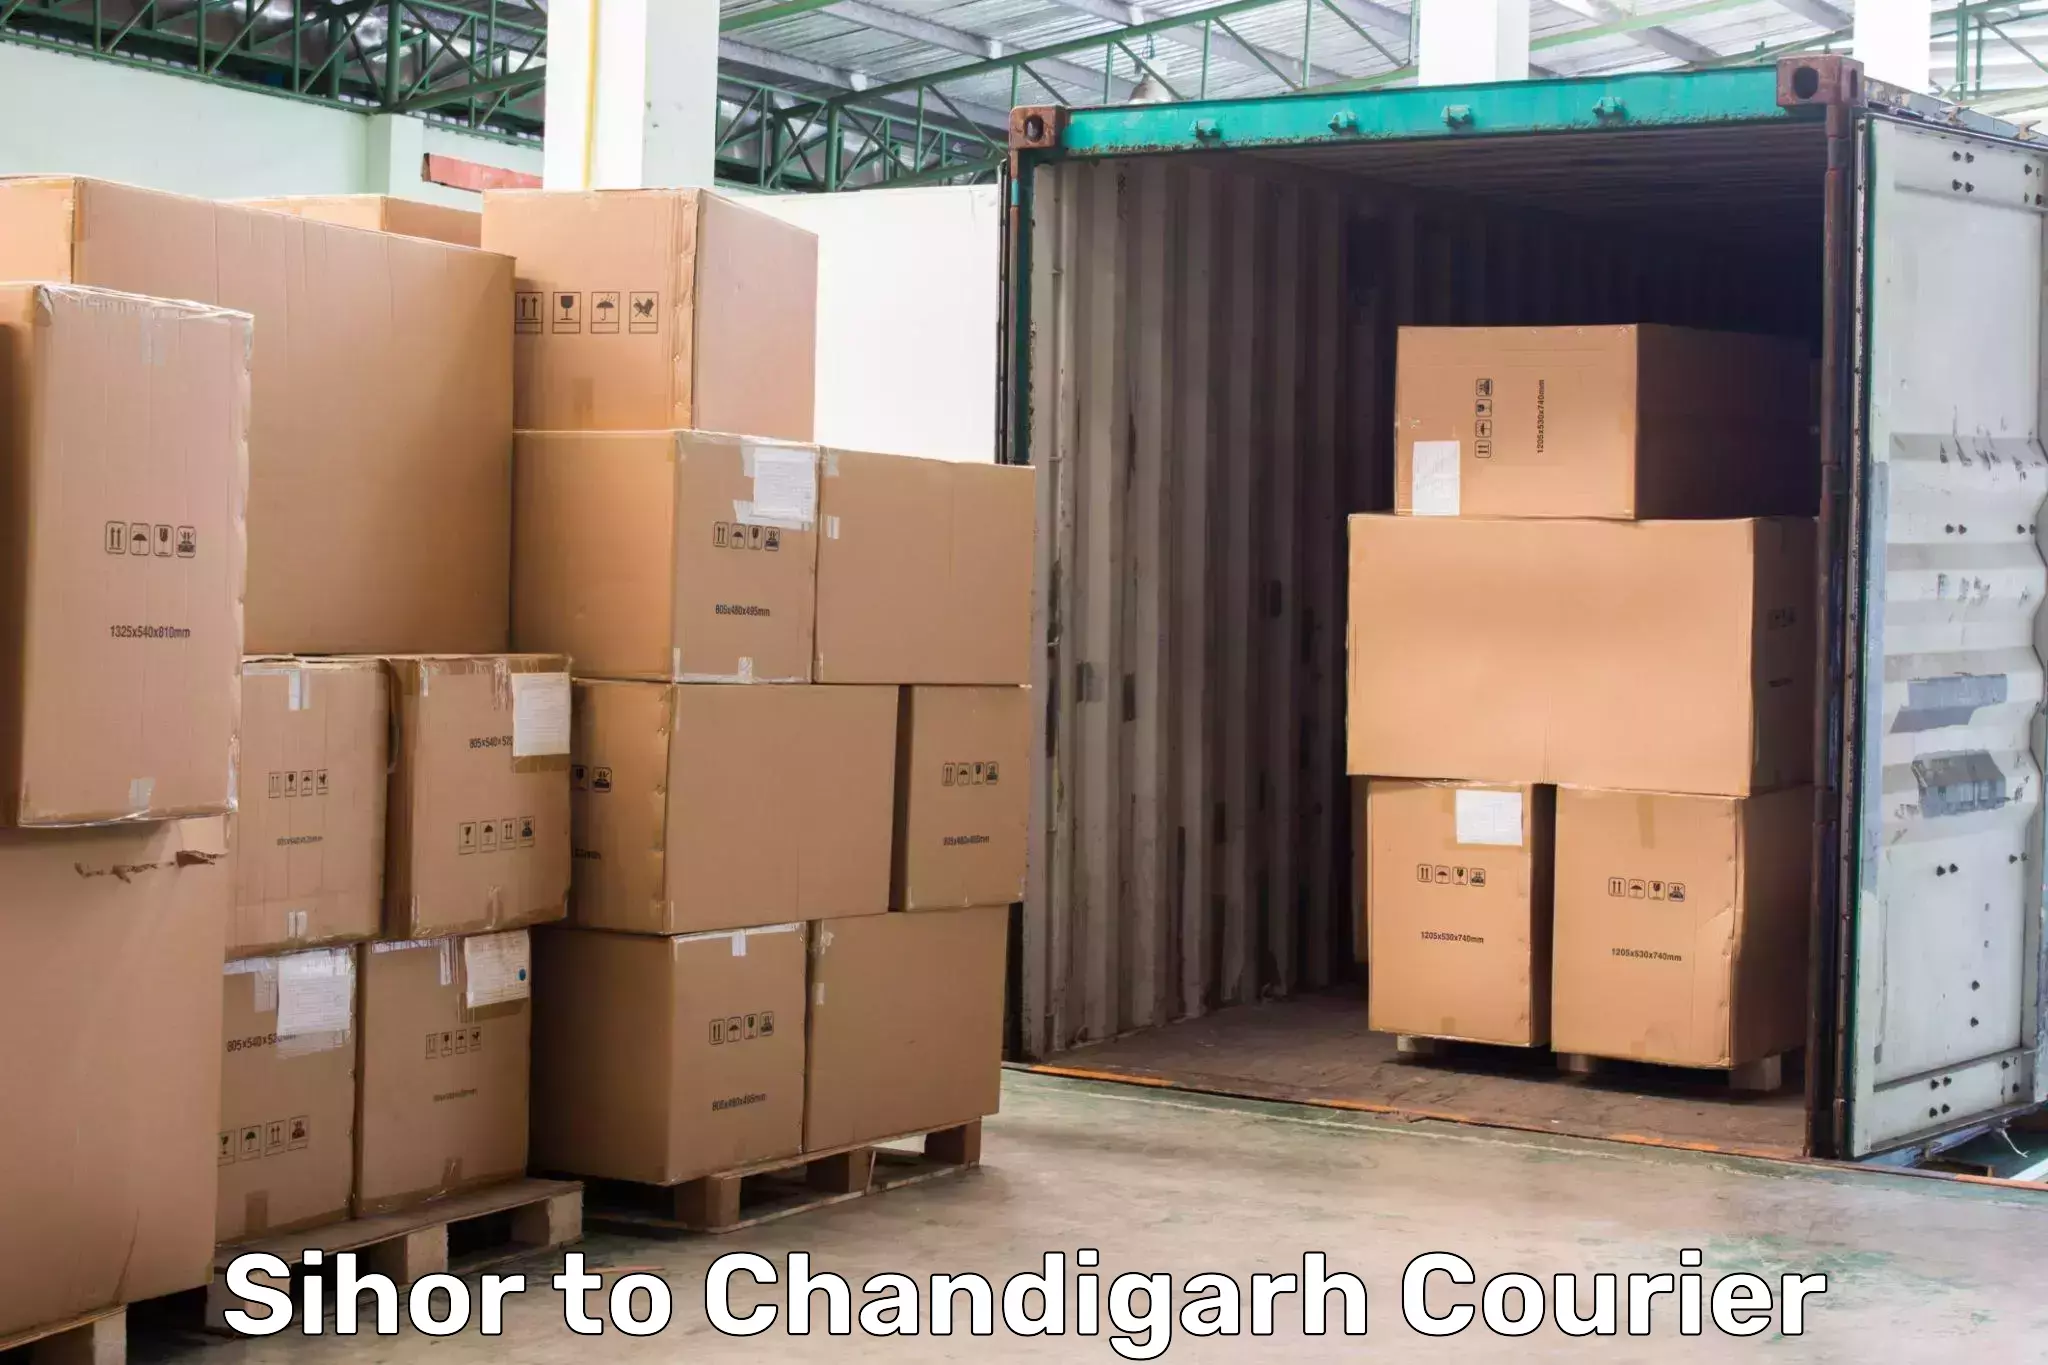 High-priority parcel service Sihor to Chandigarh